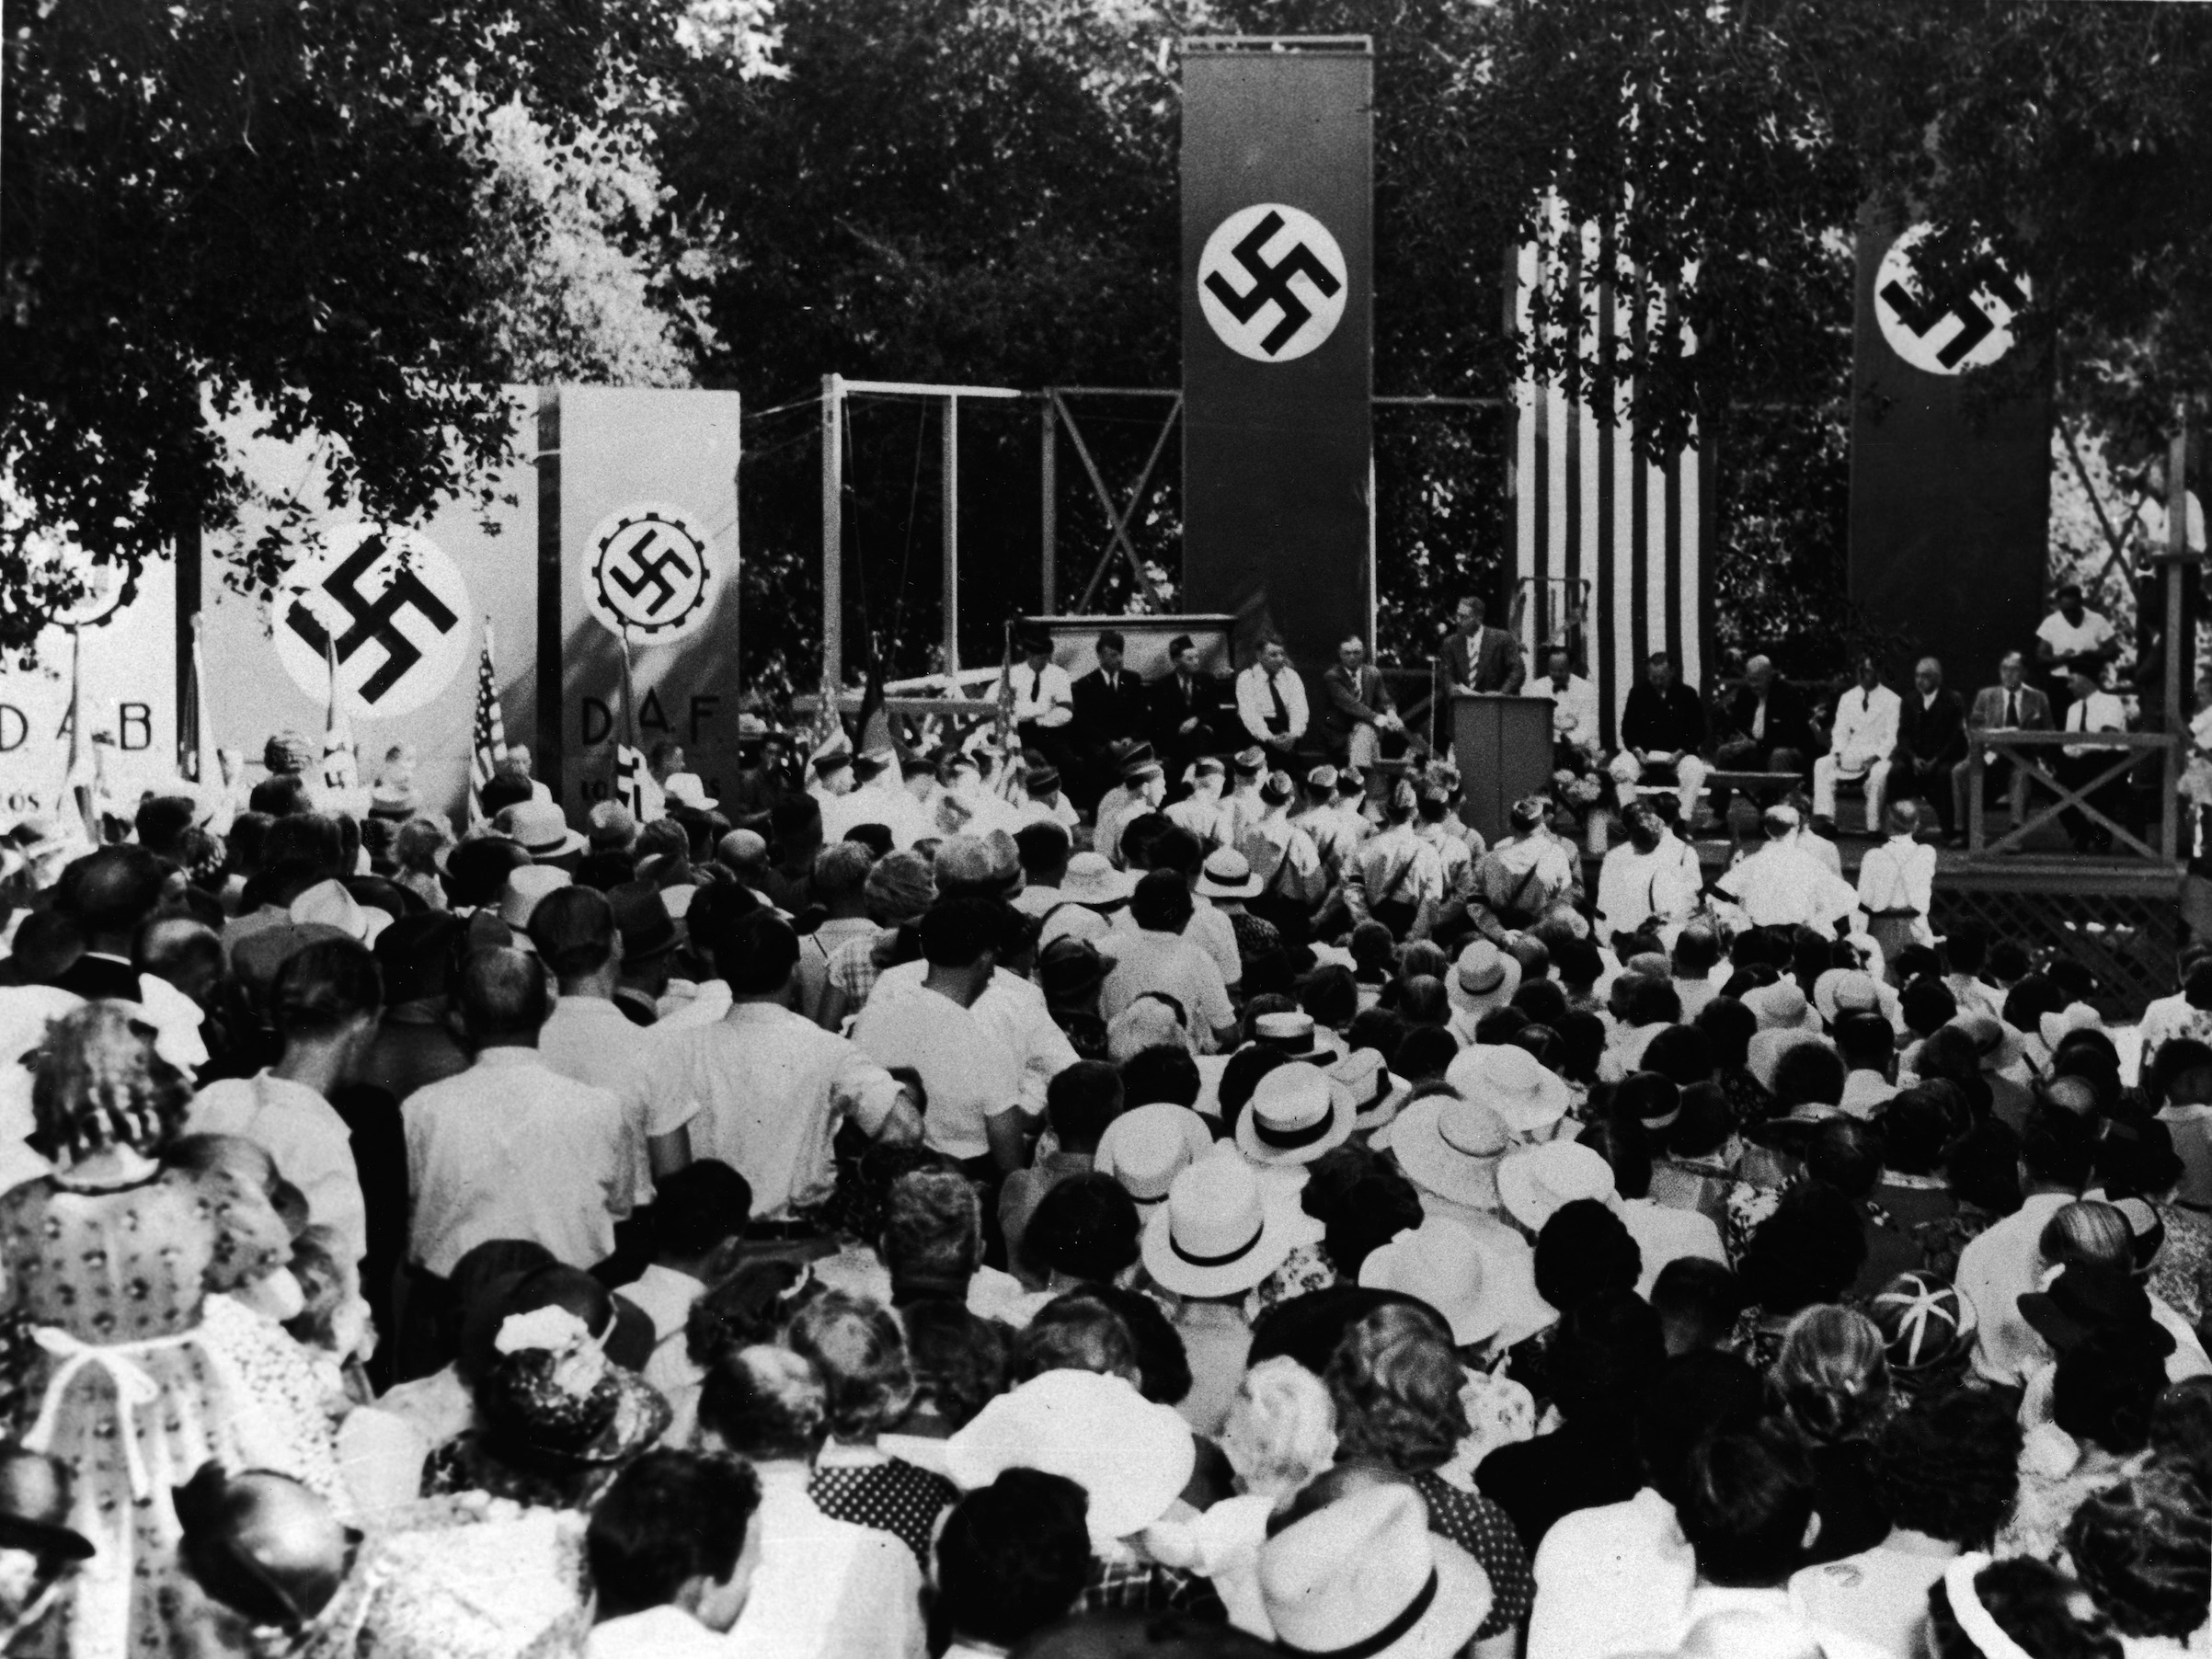 At a pro-Nazi gathering in Los Angeles in 1937, German-Americans listen to speakers who deny that American Nazi representatives were engaged in subversive activities against the United States. (Anthony Potter Collection/Getty Images)